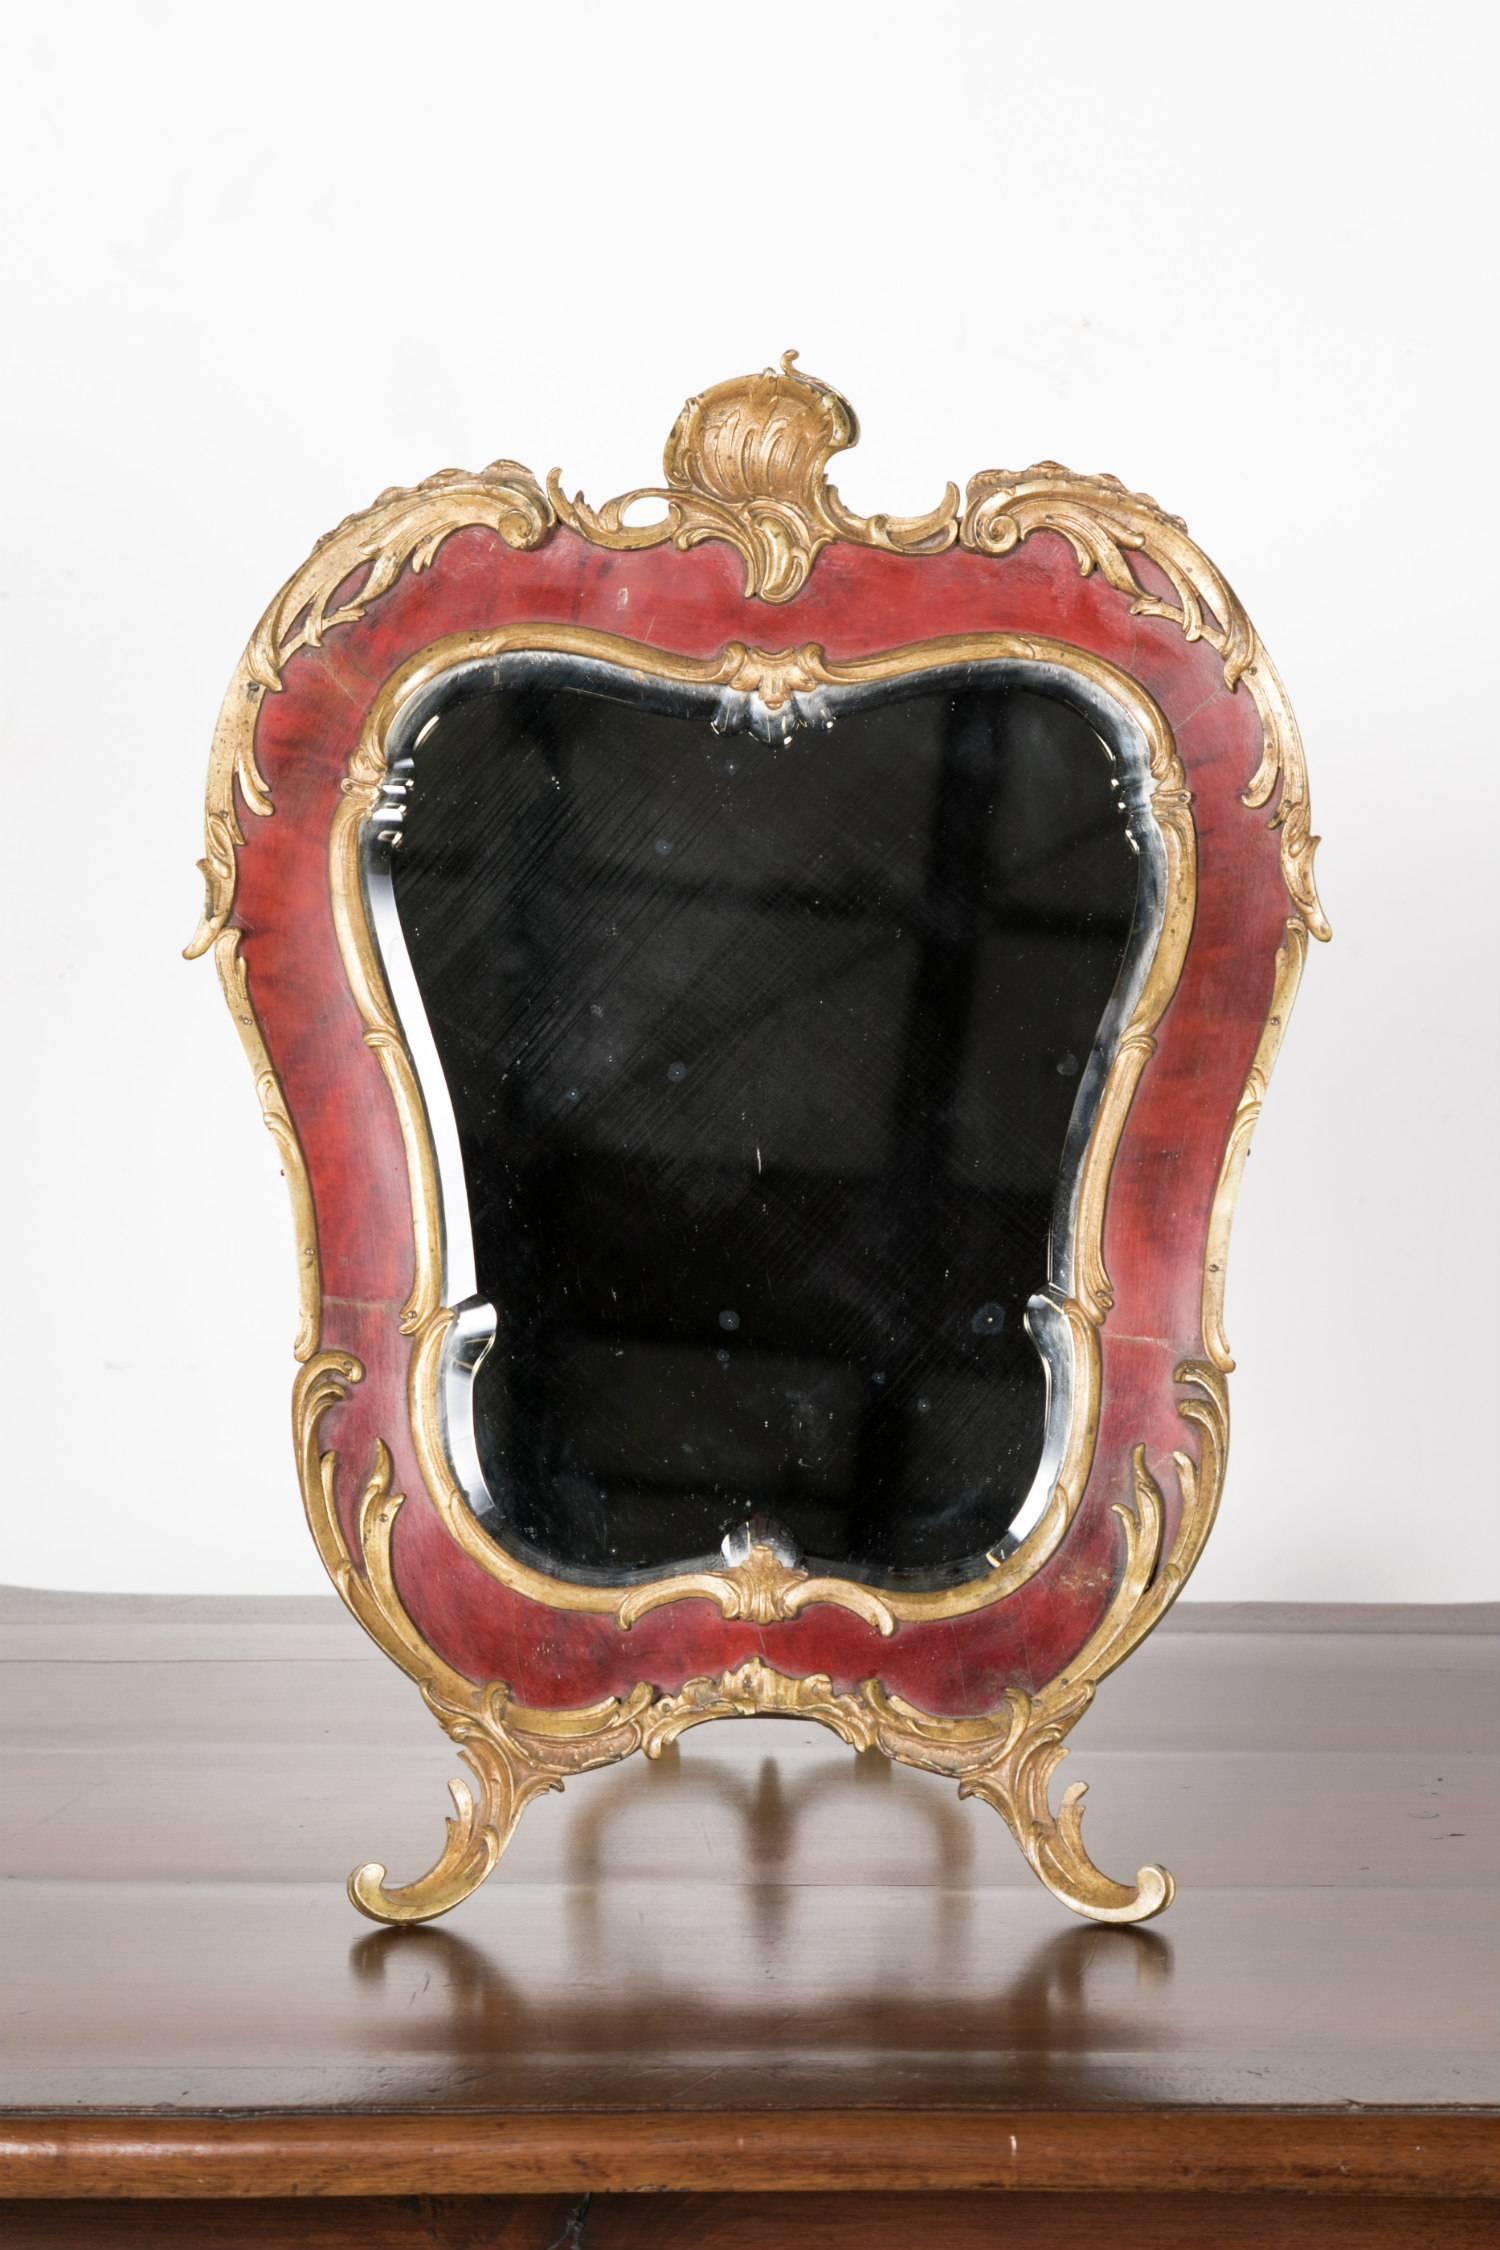 Stunning 19th century French Rococo style red tortoise shell and gilt bronze footed vanity mirror with easel back having the original bevelled glass. This freestanding boudoir mirror features stylized shells and acanthus leaves. Suitable for a